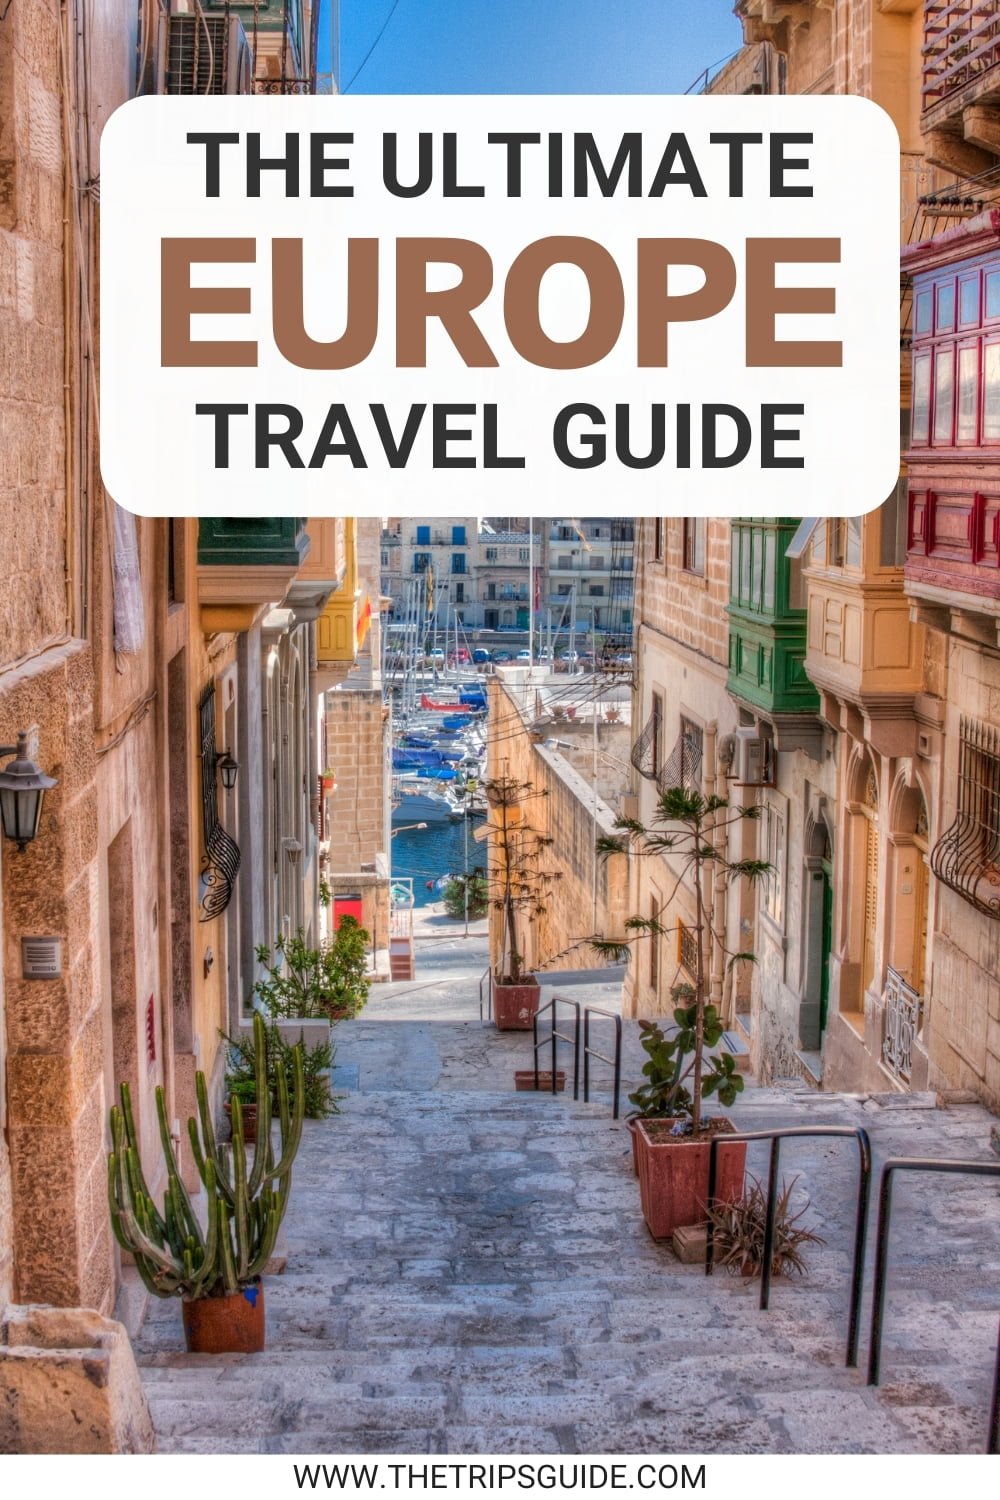 EUROPE TRAVEL GUIDE